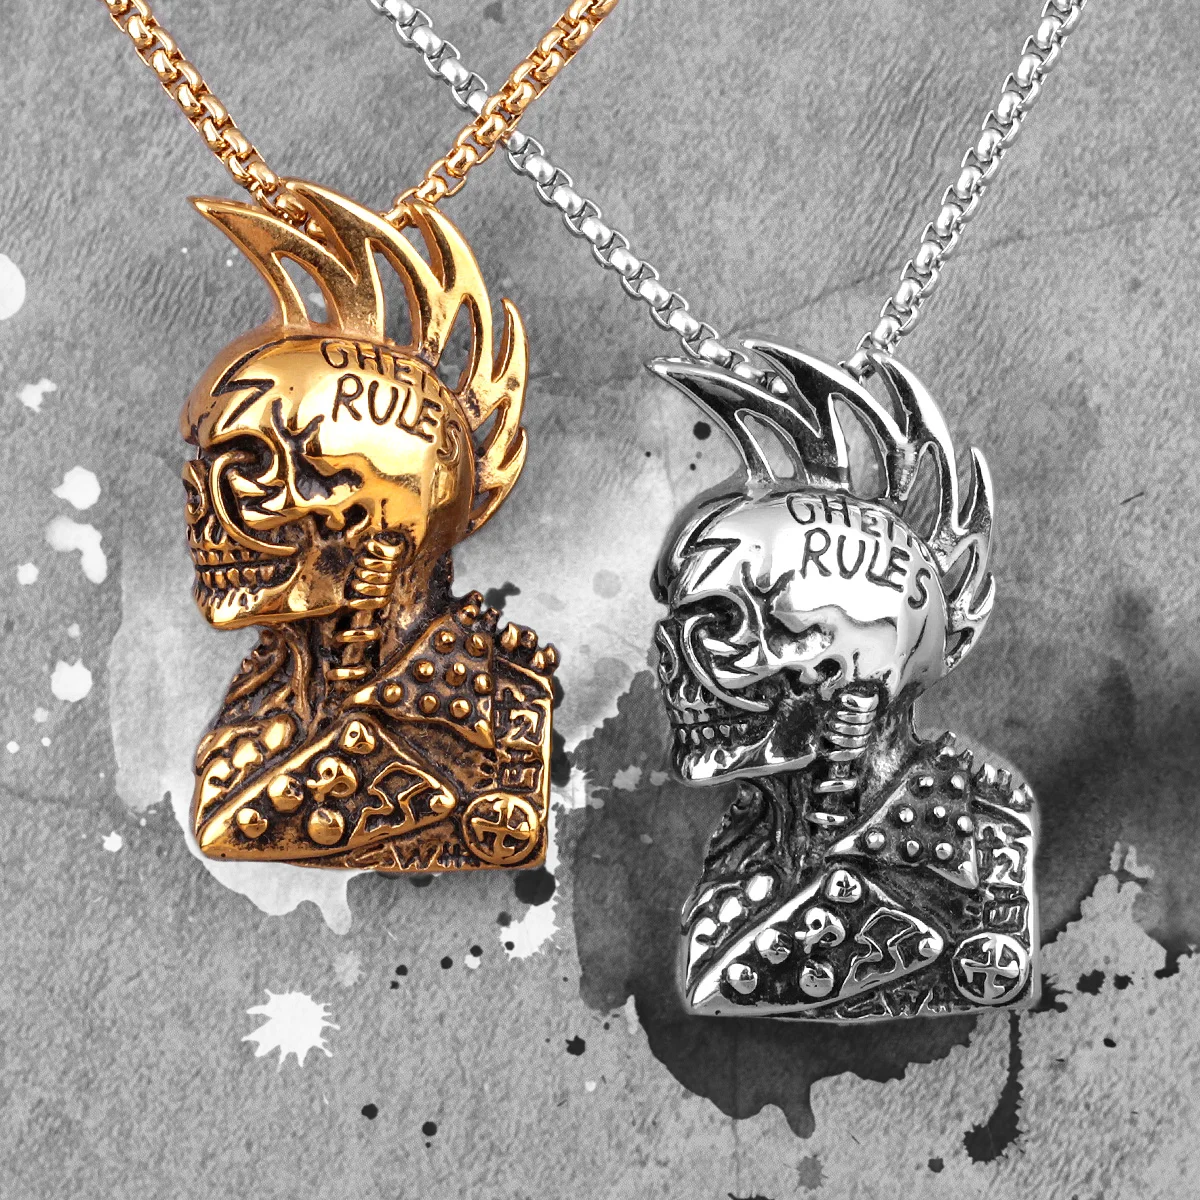 

Gothic Rules Skull Punk Rock Hiphop Men Necklaces Pendants Chain for Boy Male Stainless Steel Jewelry Creativity Gift Wholesale